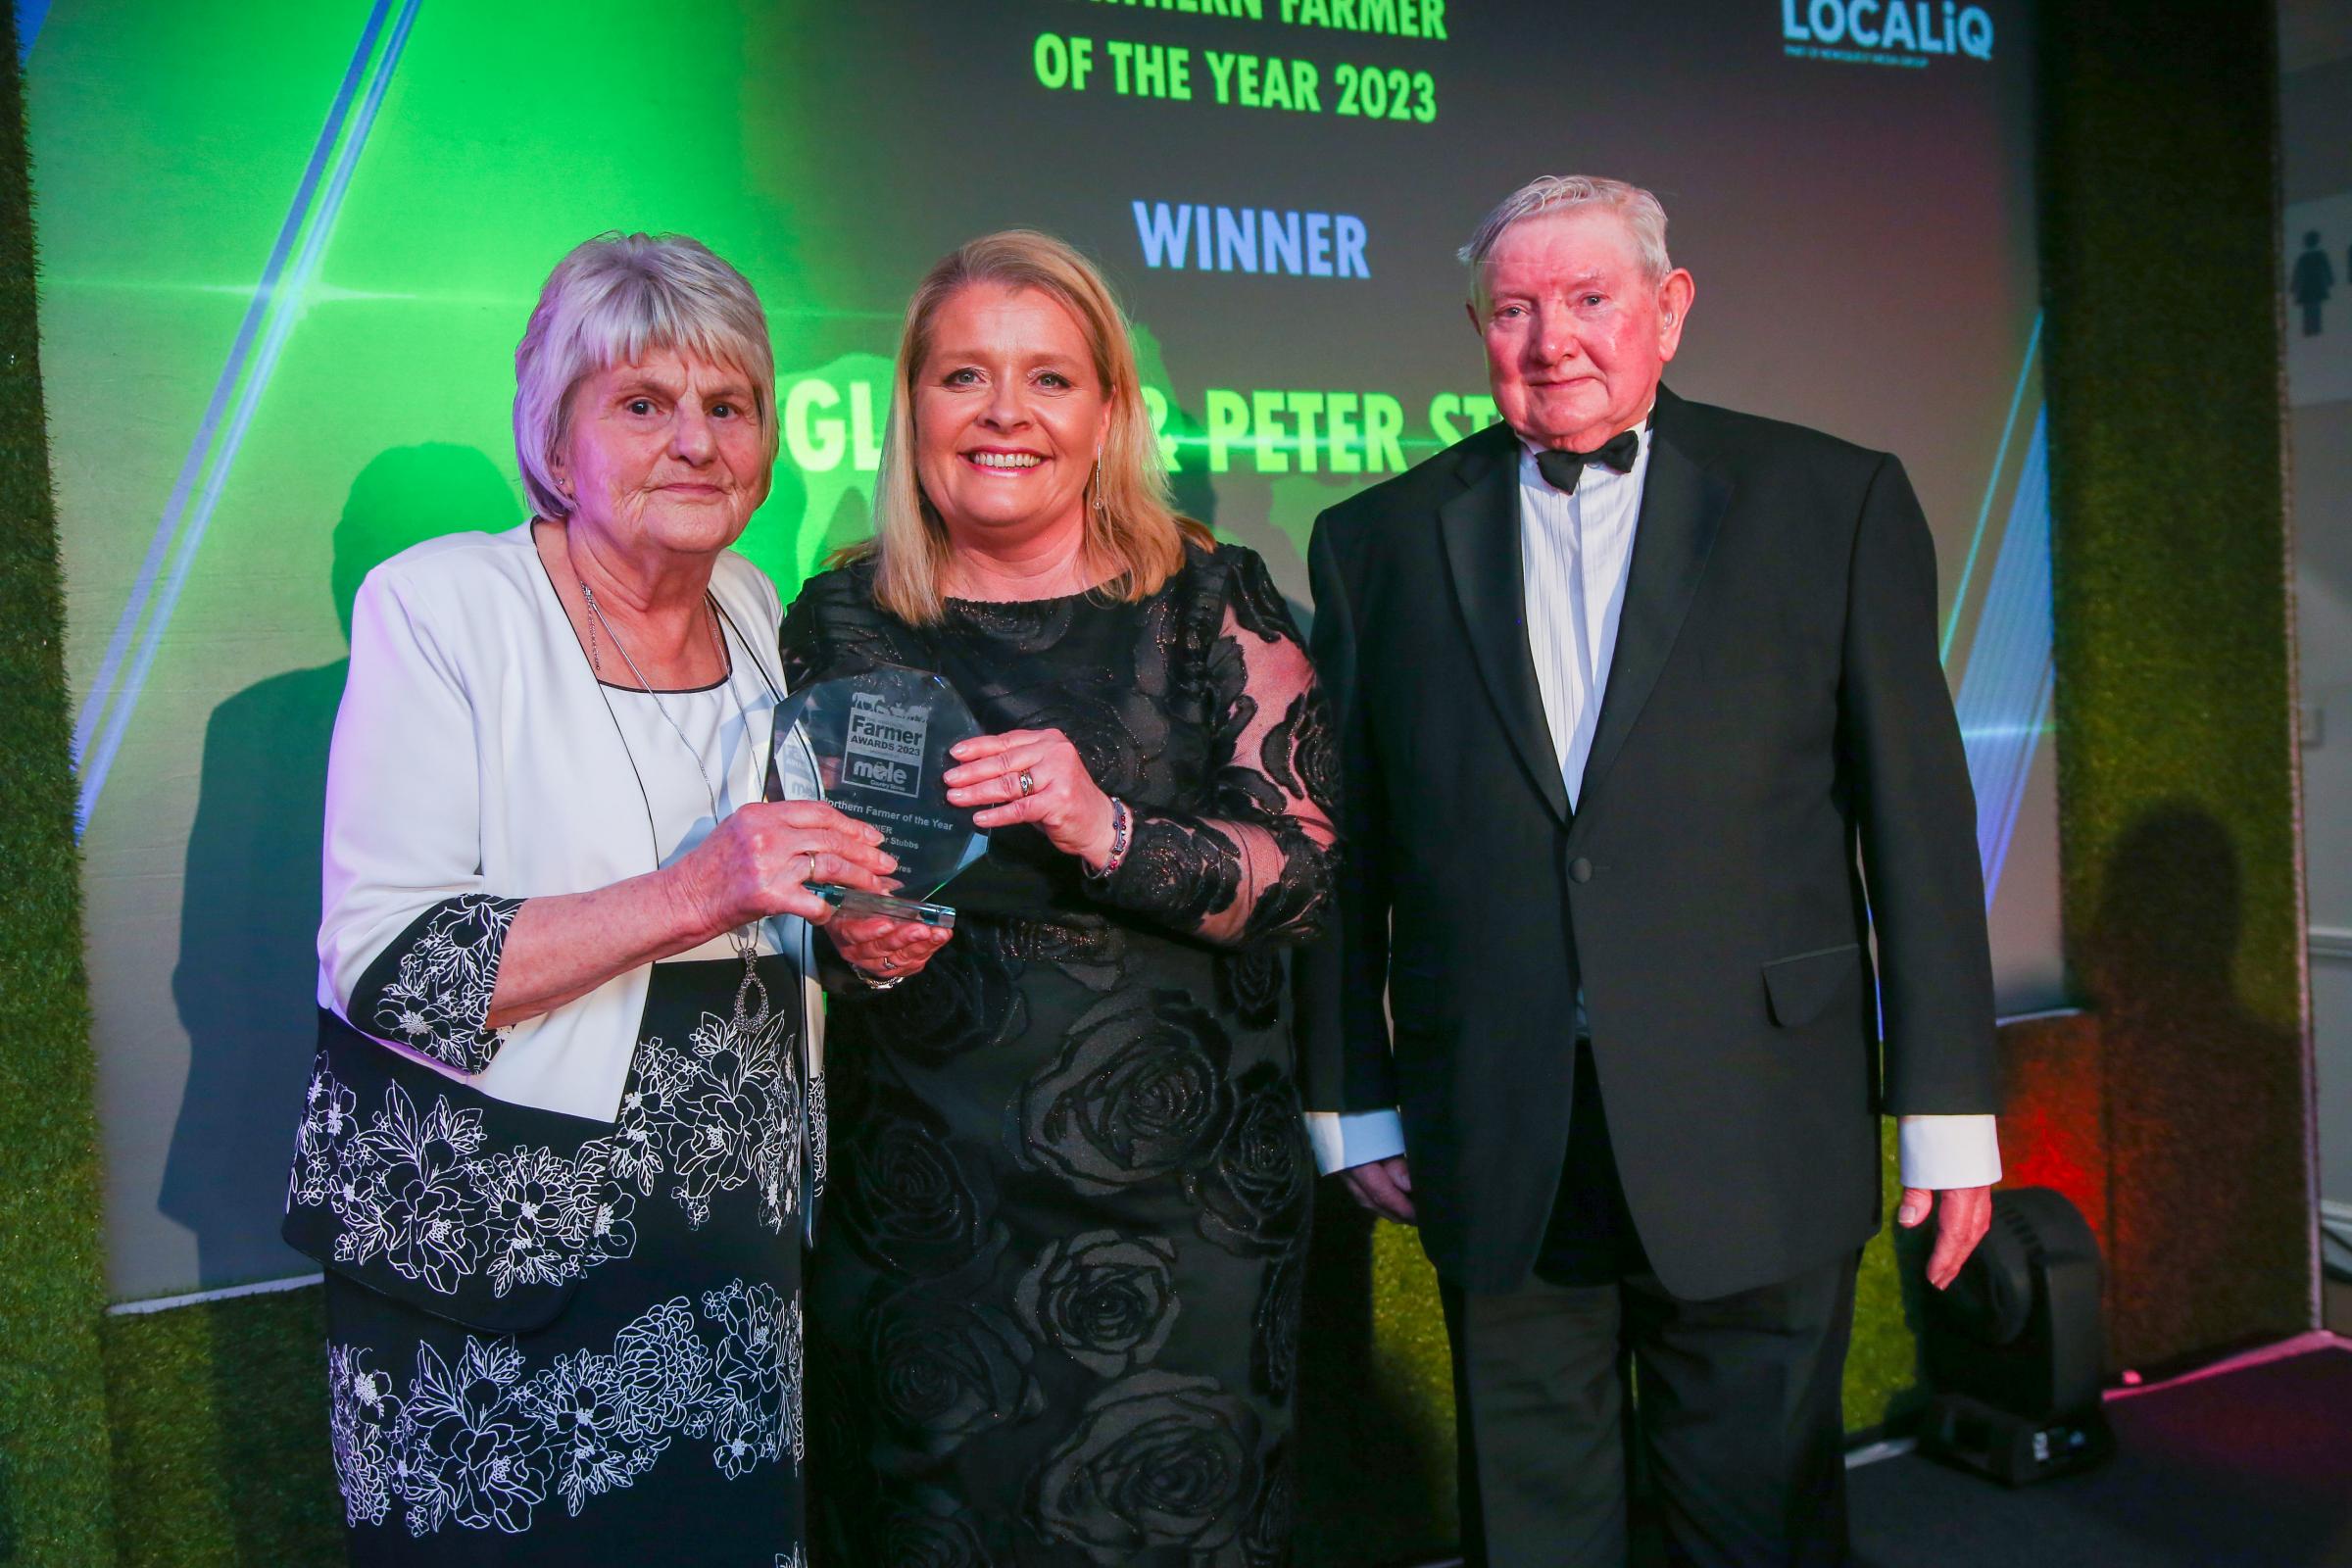 The 2023 Northern Farmer Awards at Pavillions of Harrogate. Northern Farmer of the Year - Gladys & Peter Stubbs. Presented by Sam Holdstock. Picture by Tom Banks